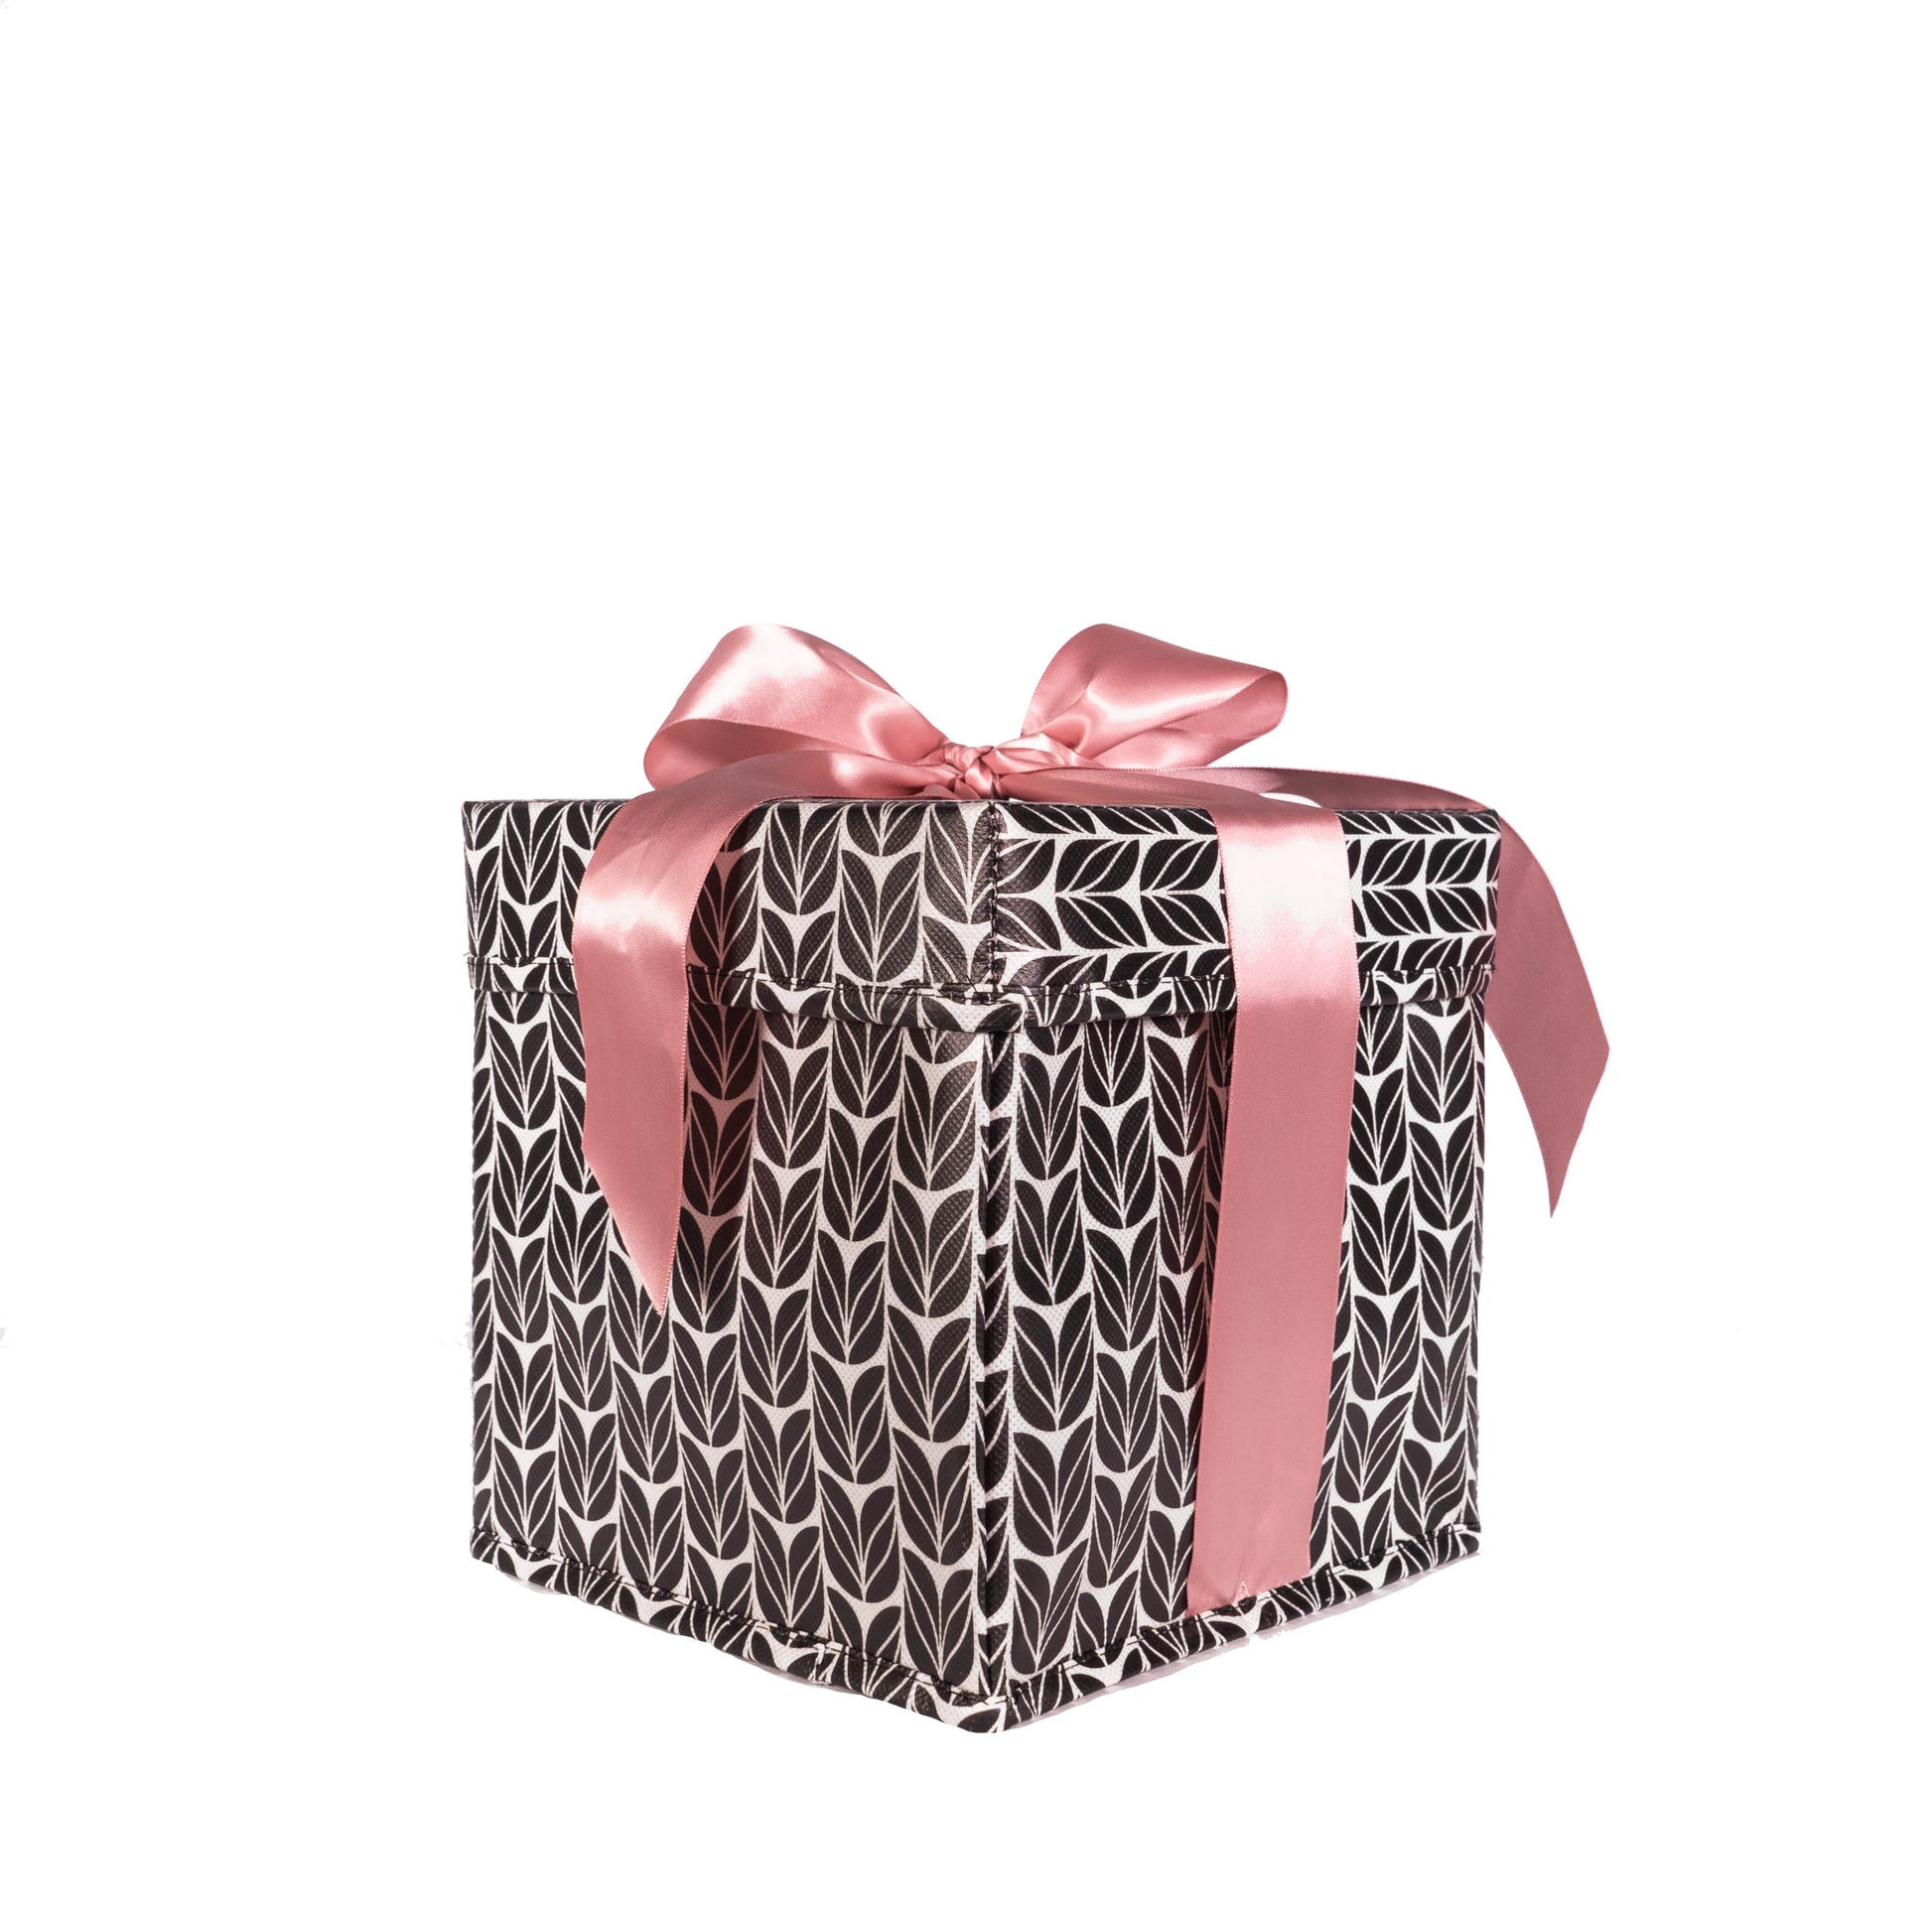 12-piece Extra Strong Reusable Gift Wrap Collection in Pink Gold